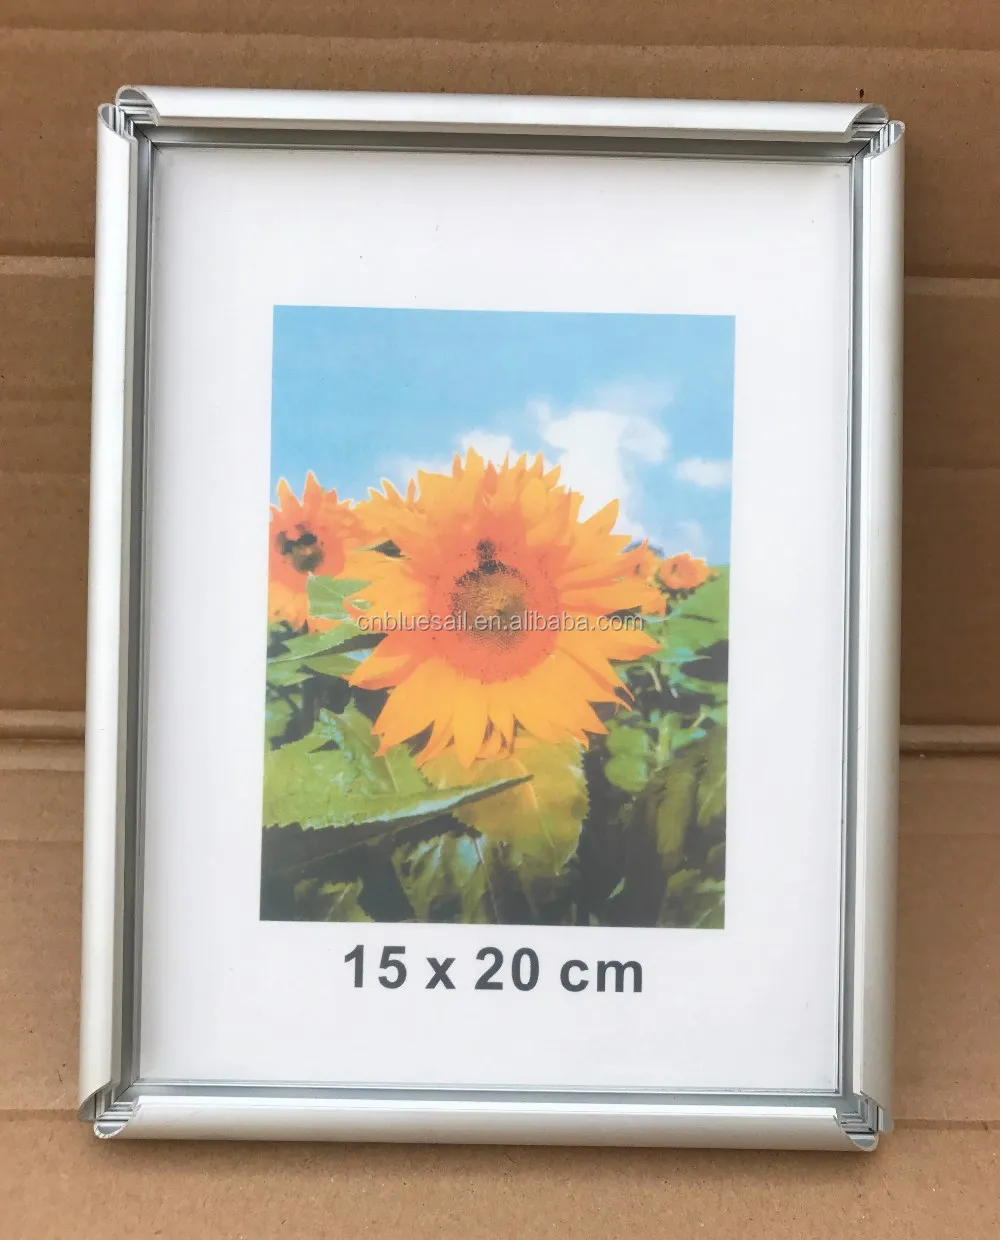 15x20cm Snap Frame Aluminum Picture Frame Silver Photo Frame For Open Door Buy 15x20cm Snap Frame Aluminum Picture Frame Silver Photo Frame For Open Door Product On Alibaba Com